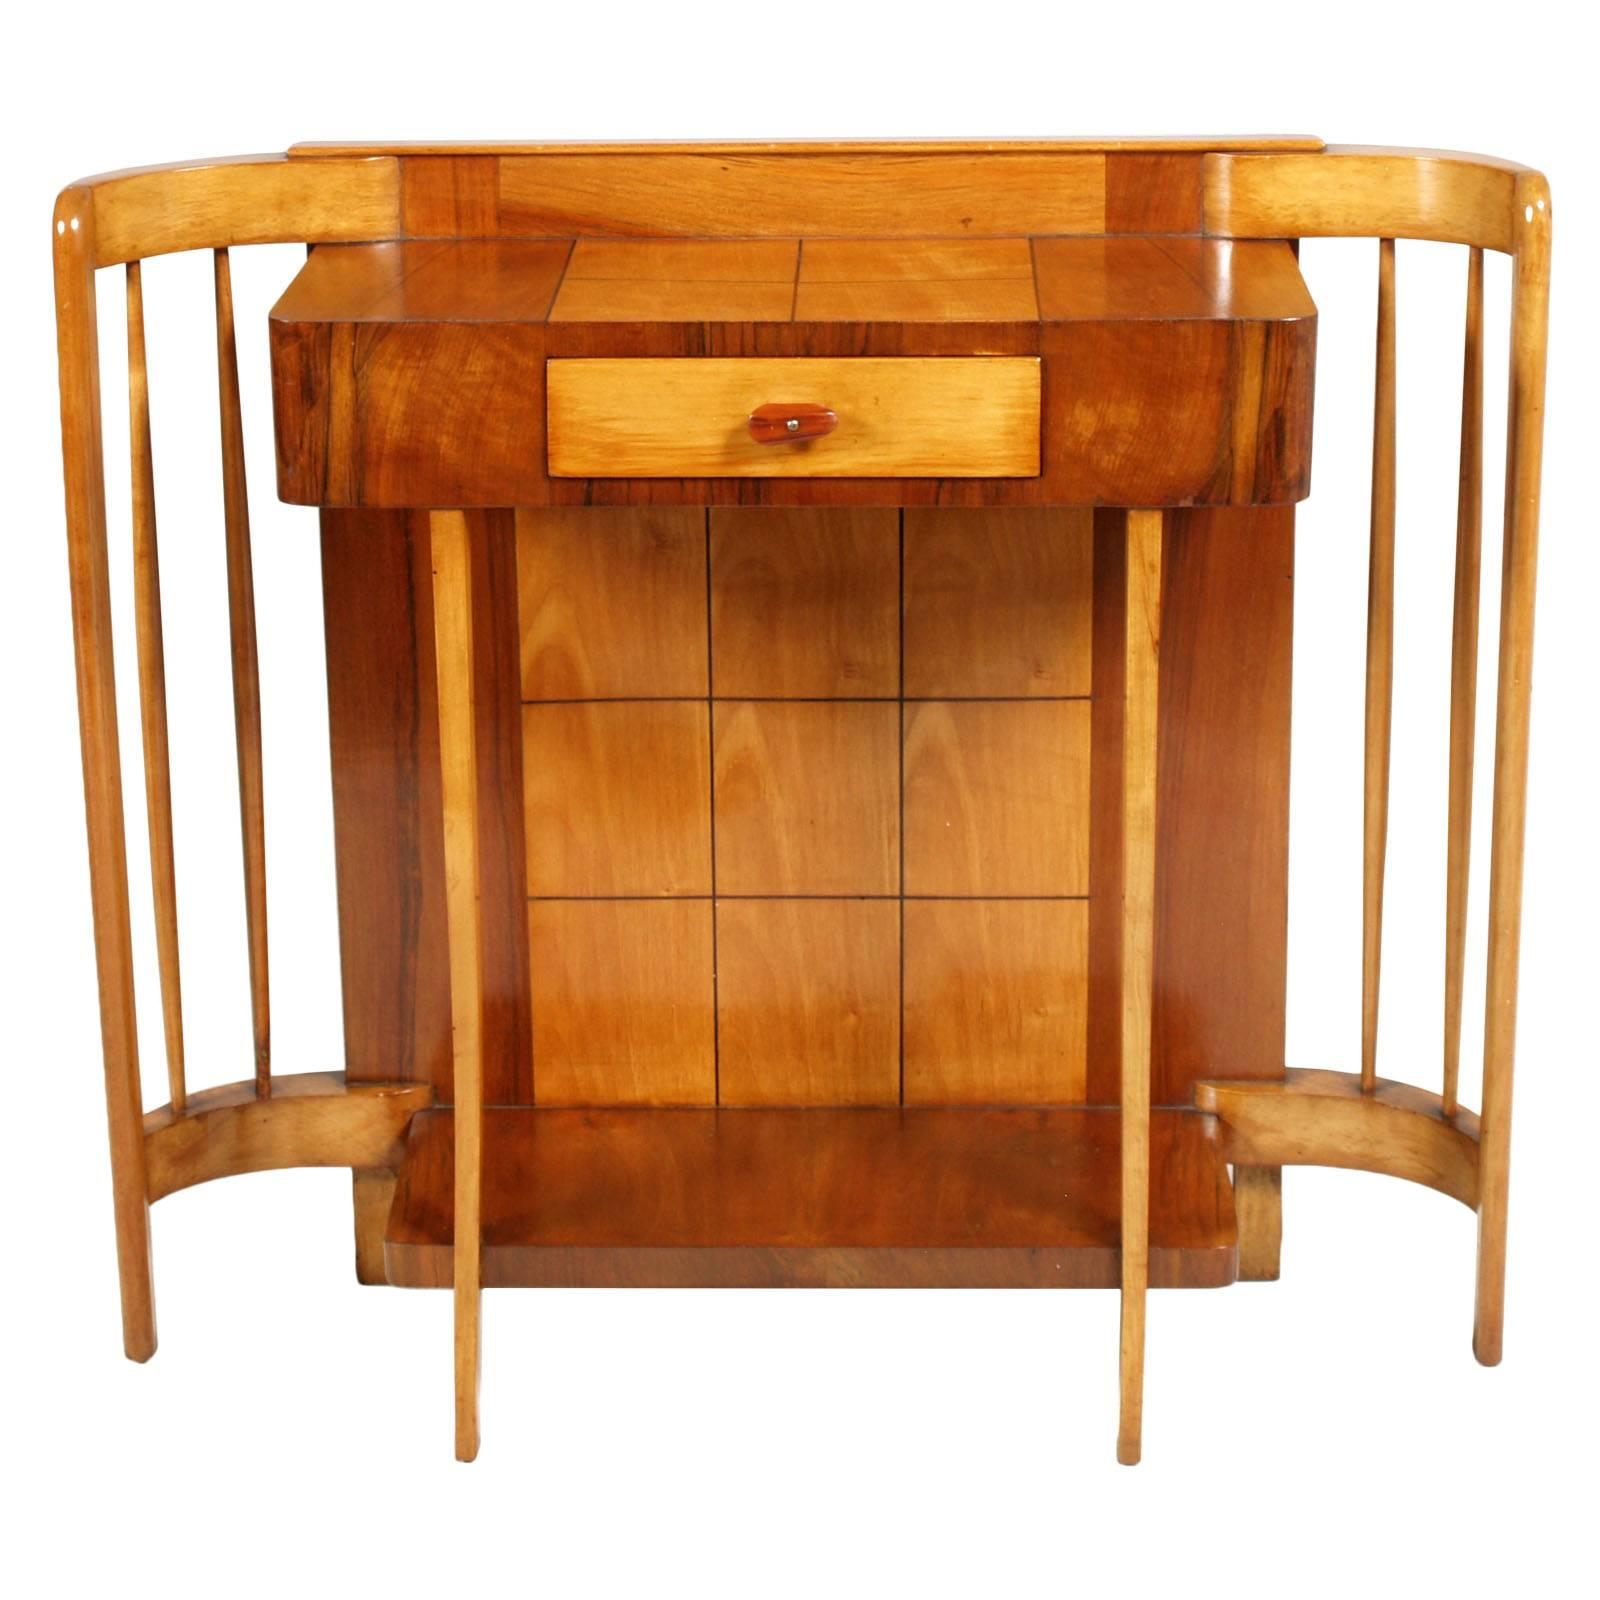 Mid-20th century Art Deco console with mirror Paolo Buffa style, by La Permanente Mobili Cantù, in walnut and massive maple ; polished to wax.
We can sell separately

Measures cm: Console H84 W96 D30 (mirror H56 W41 D4).